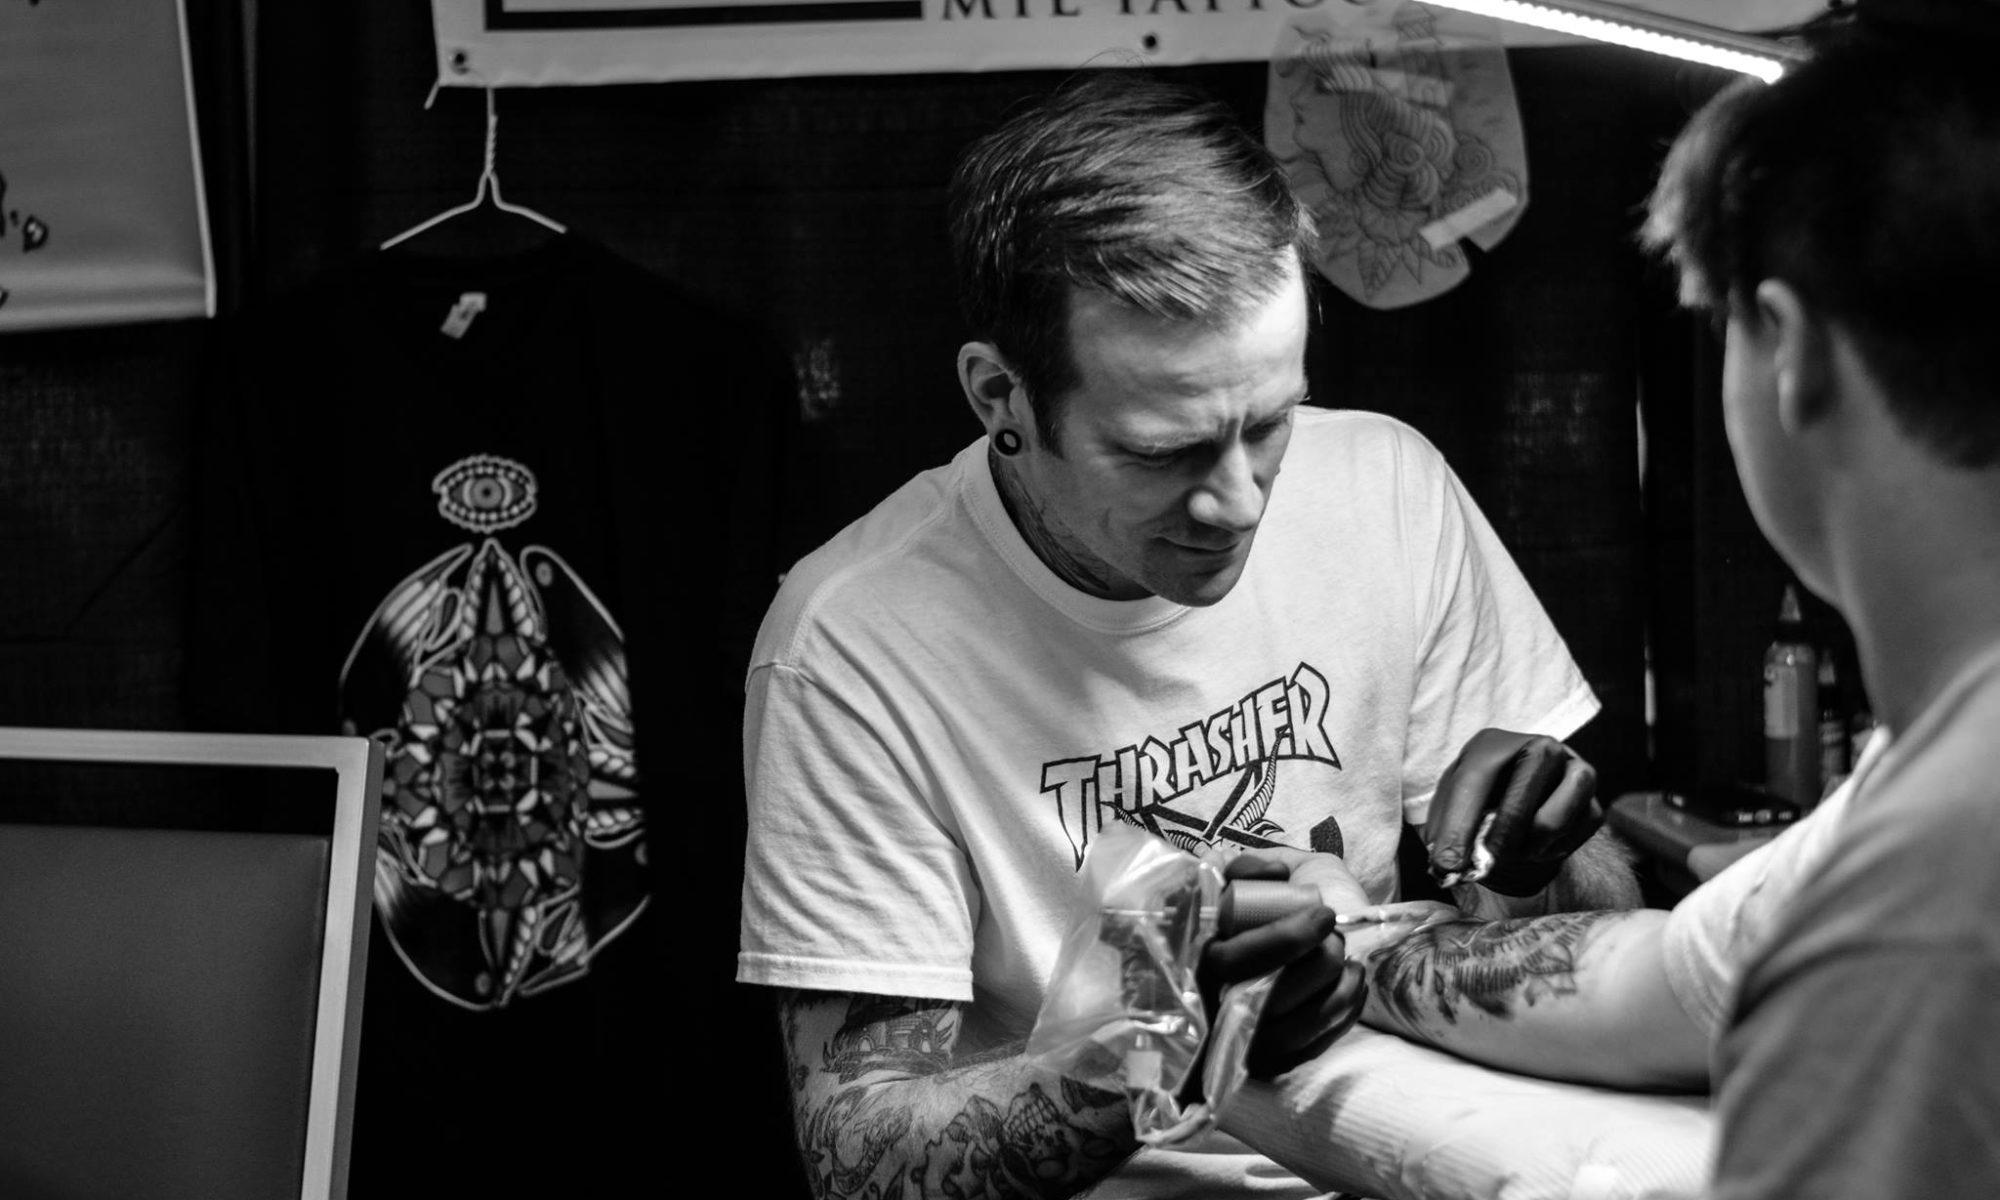 Celebrating the Art - and Fun - of the Tattoo World